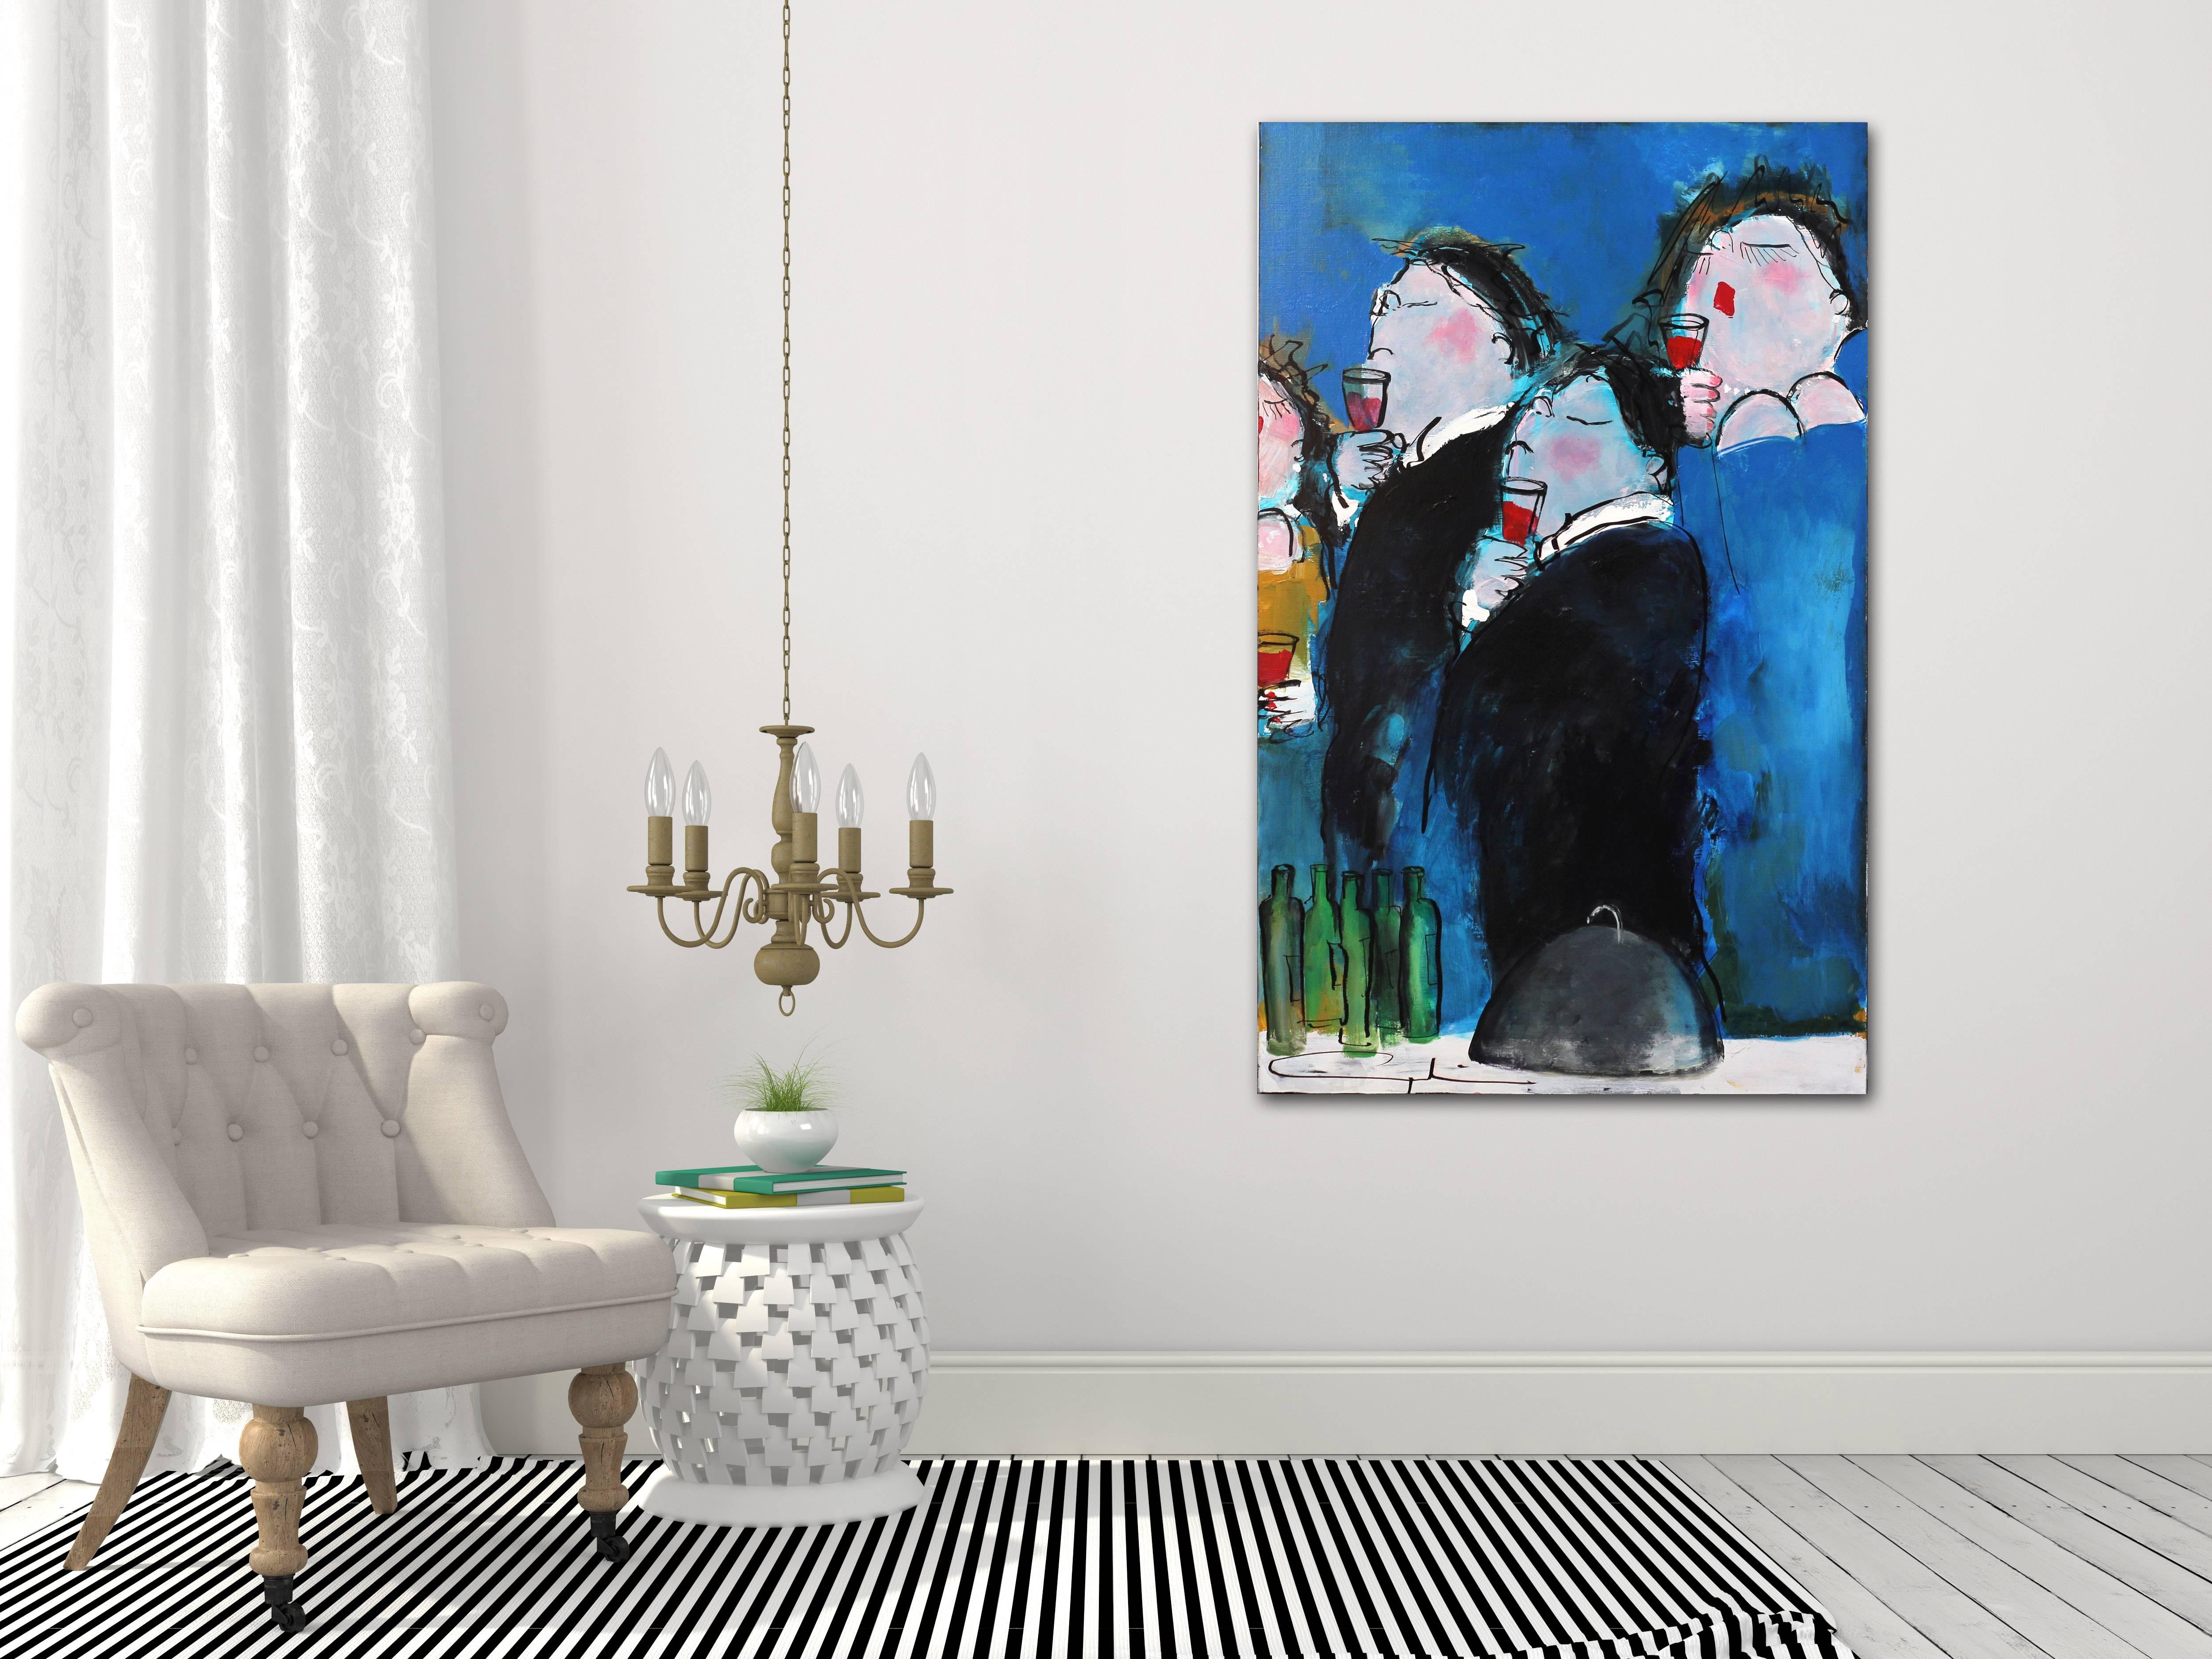 Gerdine Duijsens’ spirited and evocative figures are instantly recognizable and unforgettable. They emit a sense of pleasure and contentment through their expressions and into the rooms in which they hang. Enjoyment is at the heart of her figurative